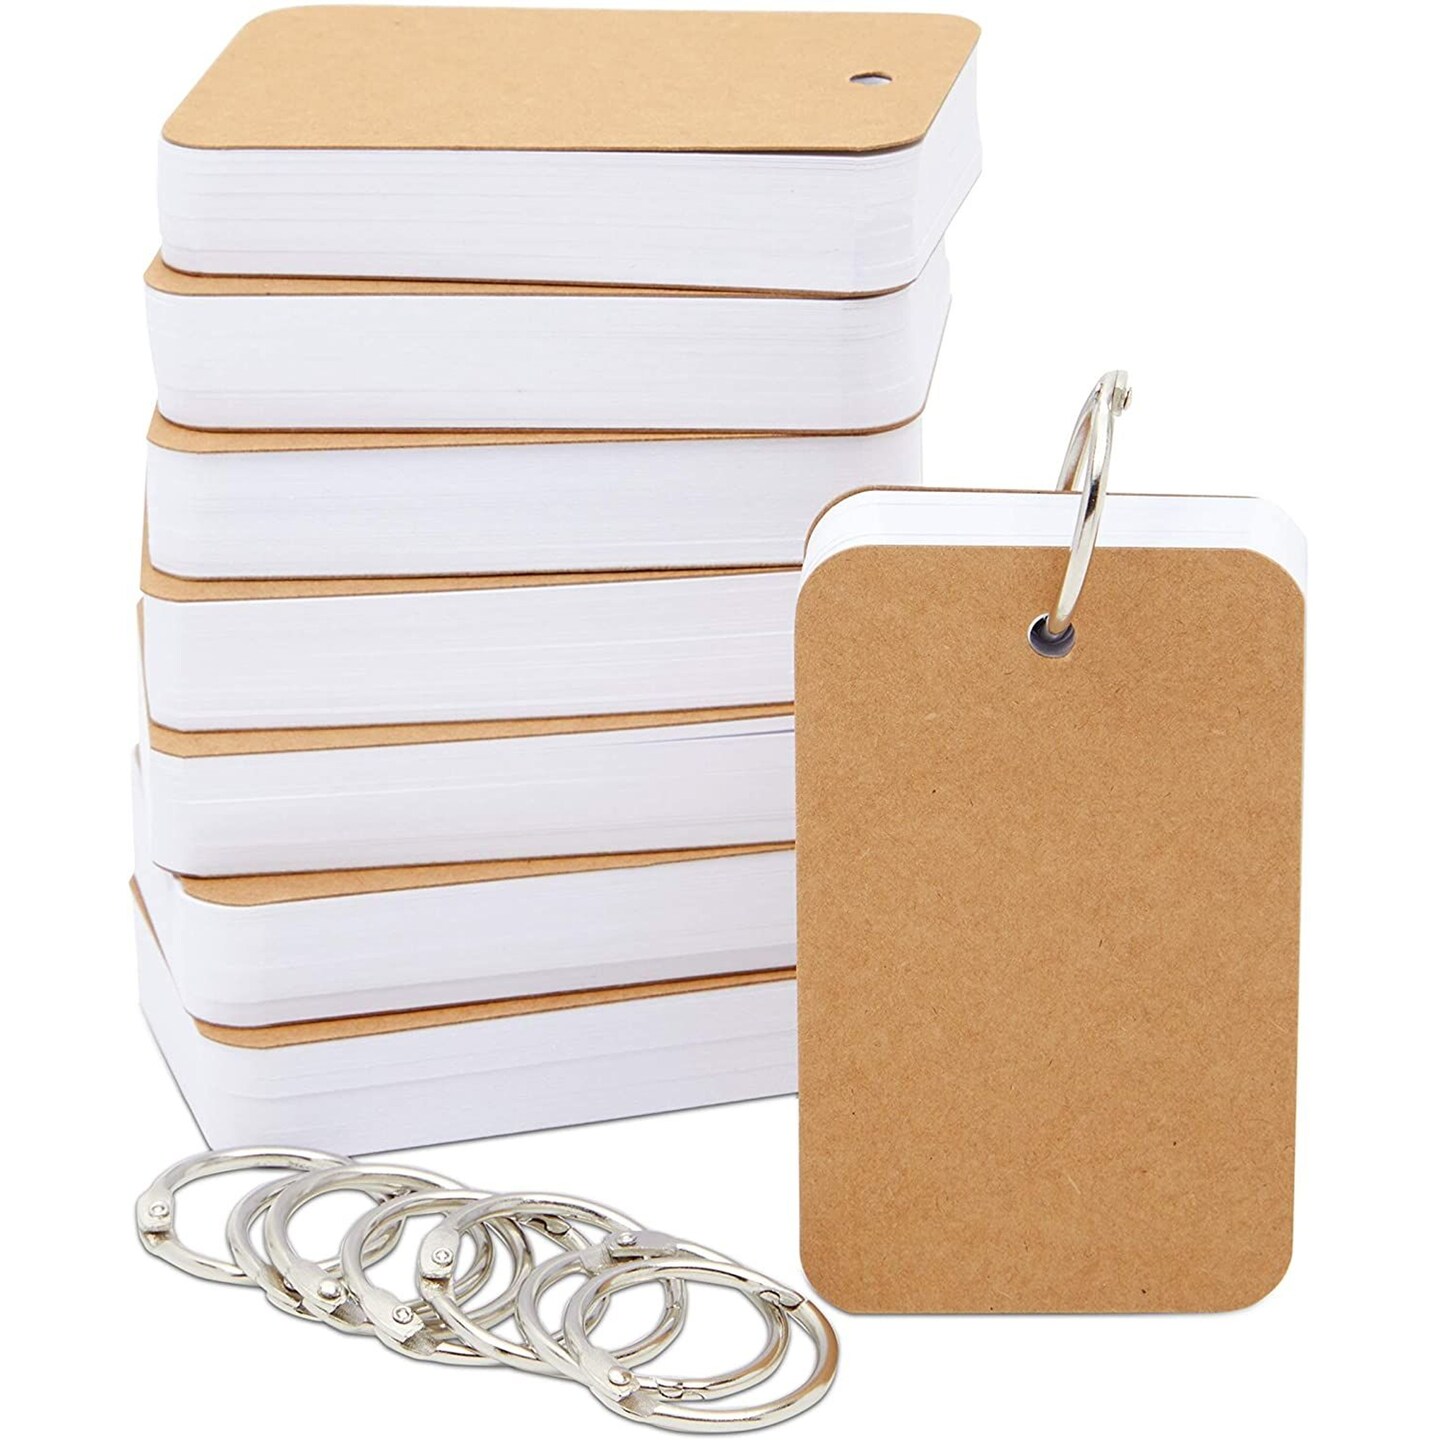 Index Cards Blank 4 x 6, Brite Assorted, Pack of 100